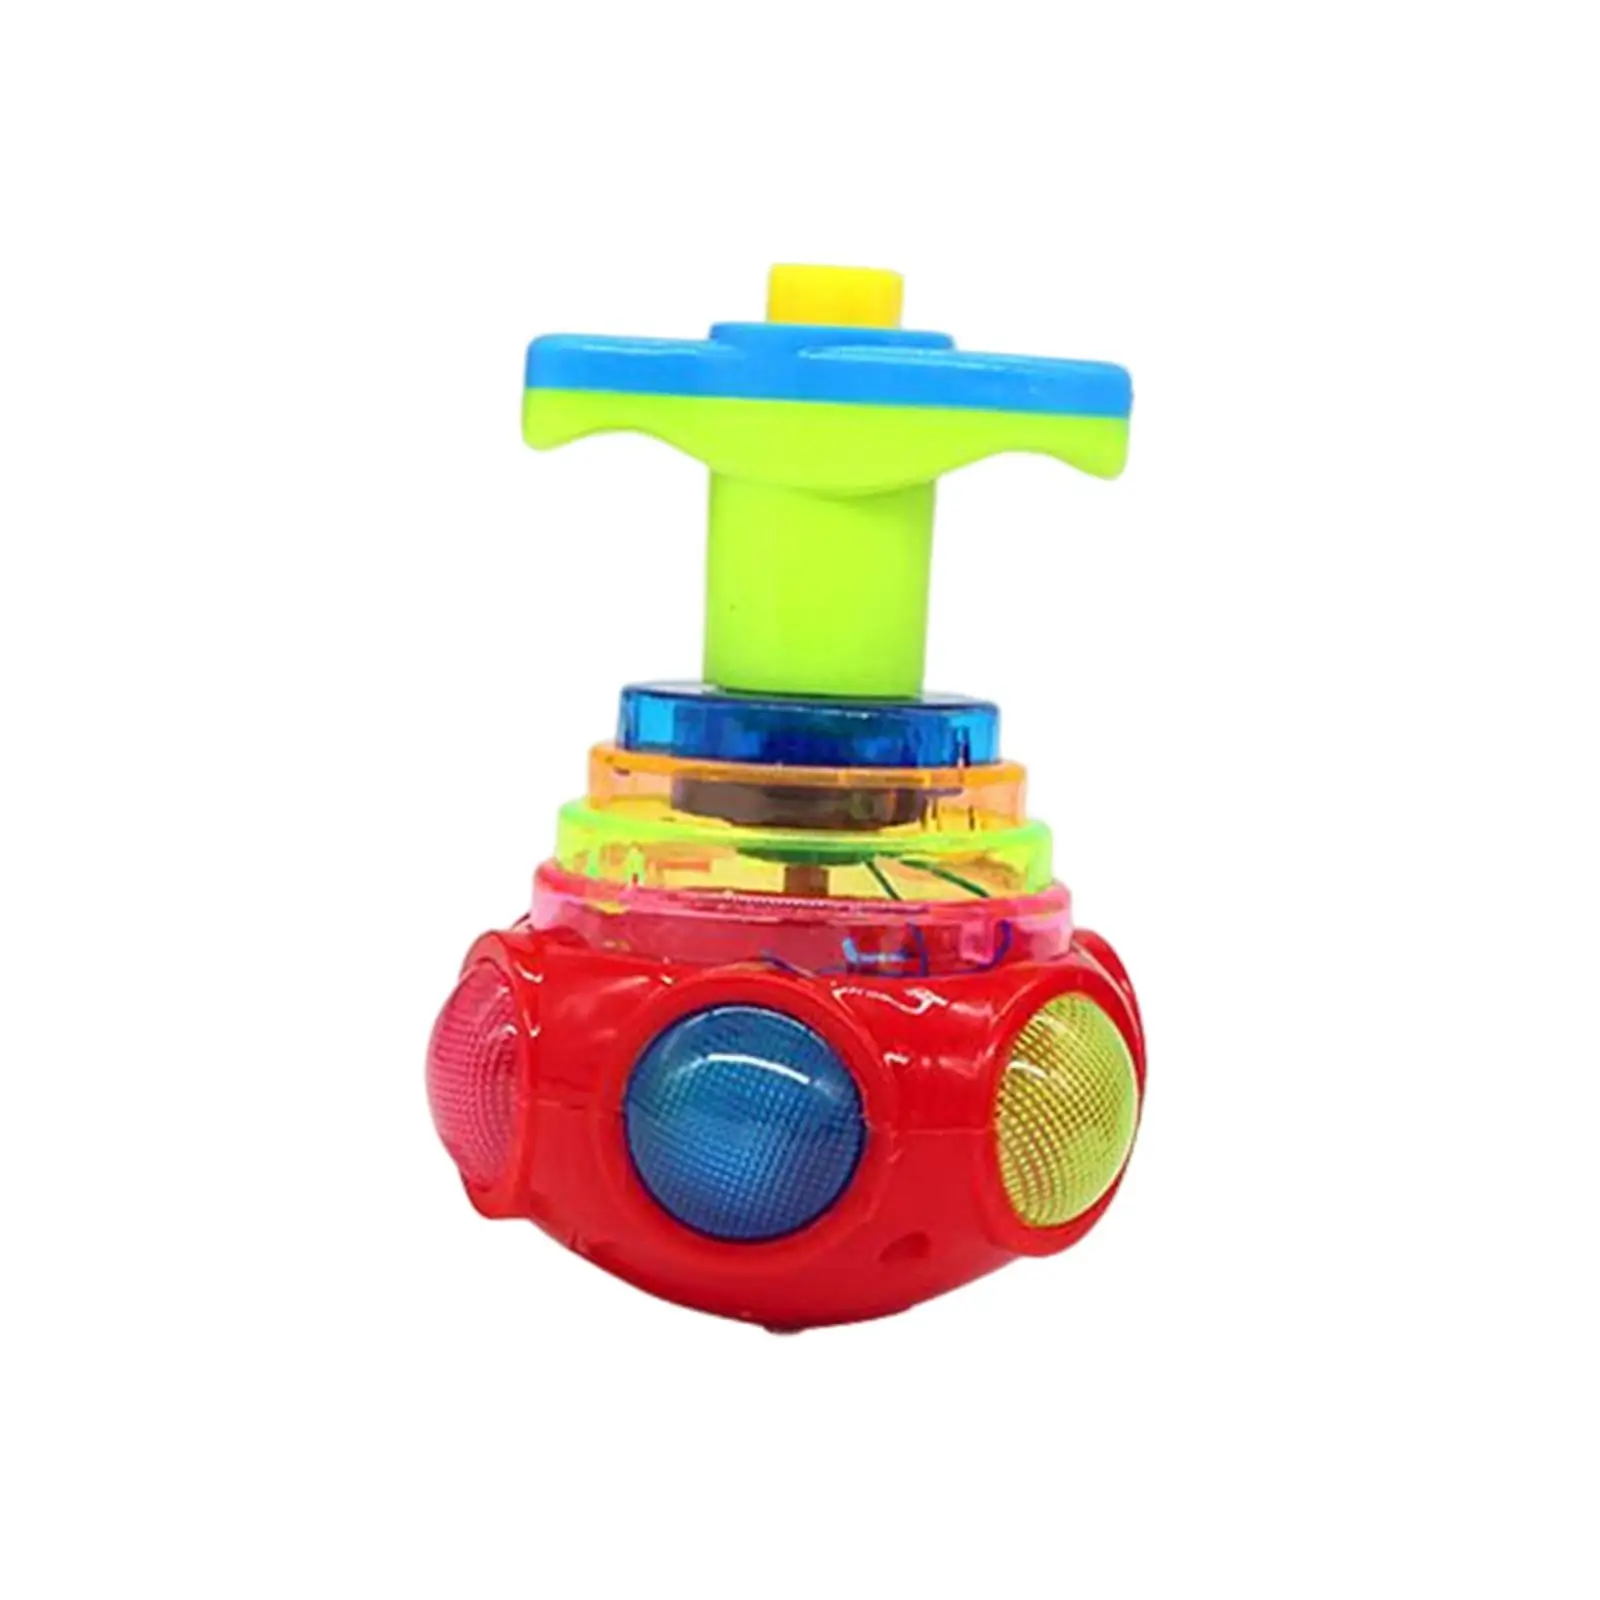 Spin Top Toy Spinner spin Top Gyro Peg Toy Kids Toys Xmas Kids Gift Spiral Gyroscope